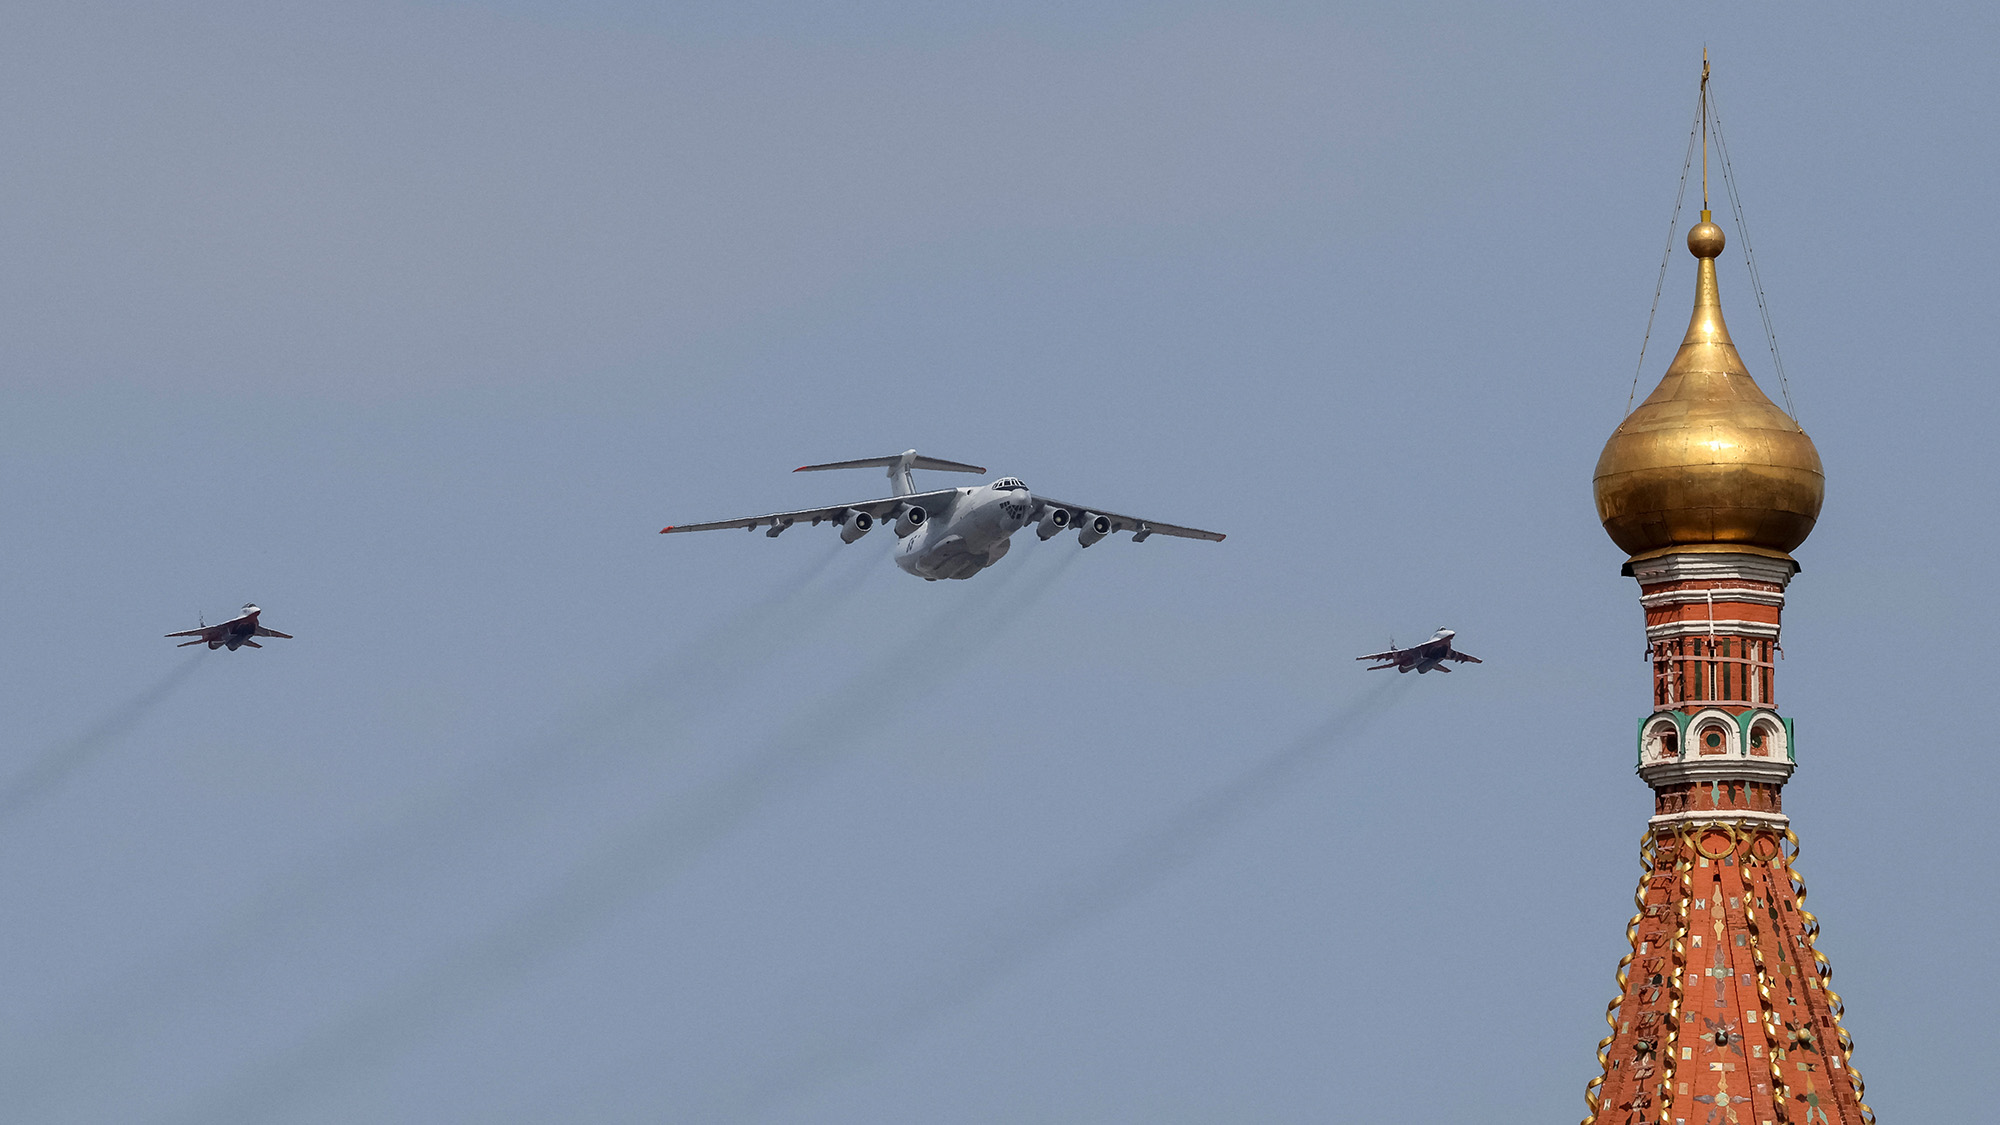 A Russian Il-78 military transport aircraft and MiG-29 fighter jets fly in formation during a rehearsal in Moscow on Saturday May 7.